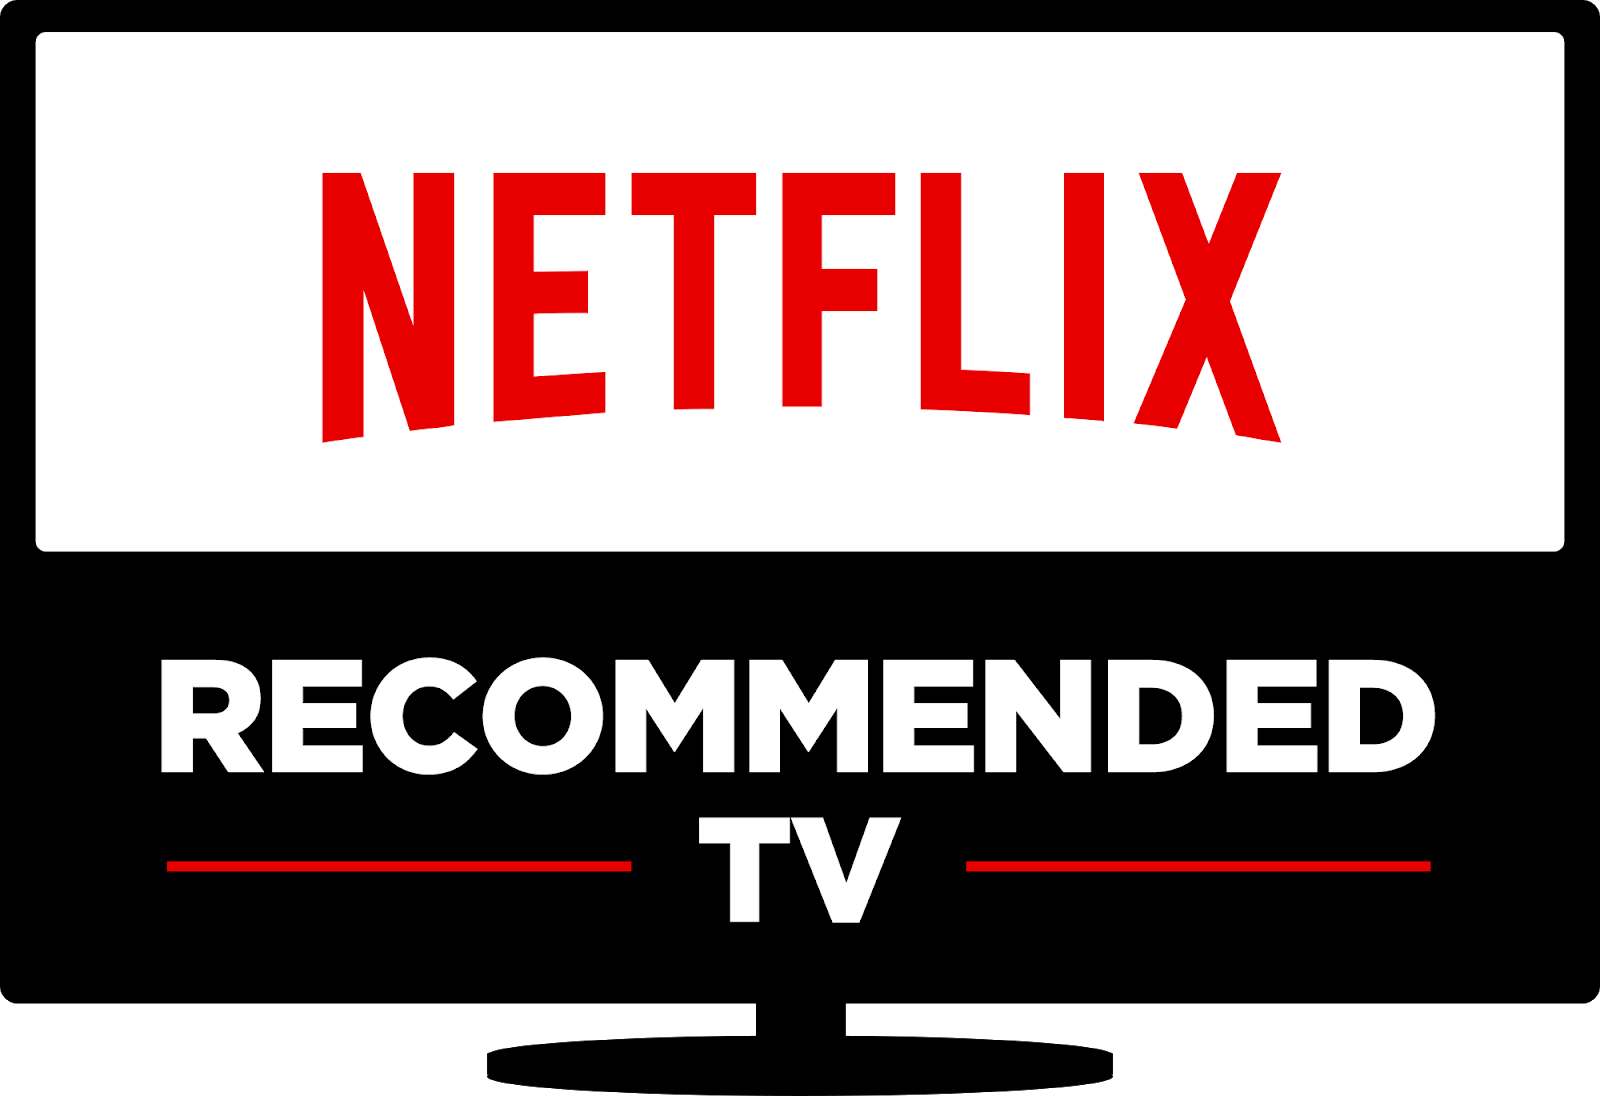 Netflix Has New Logo - Announcing the 2016 Netflix Recommended TVs